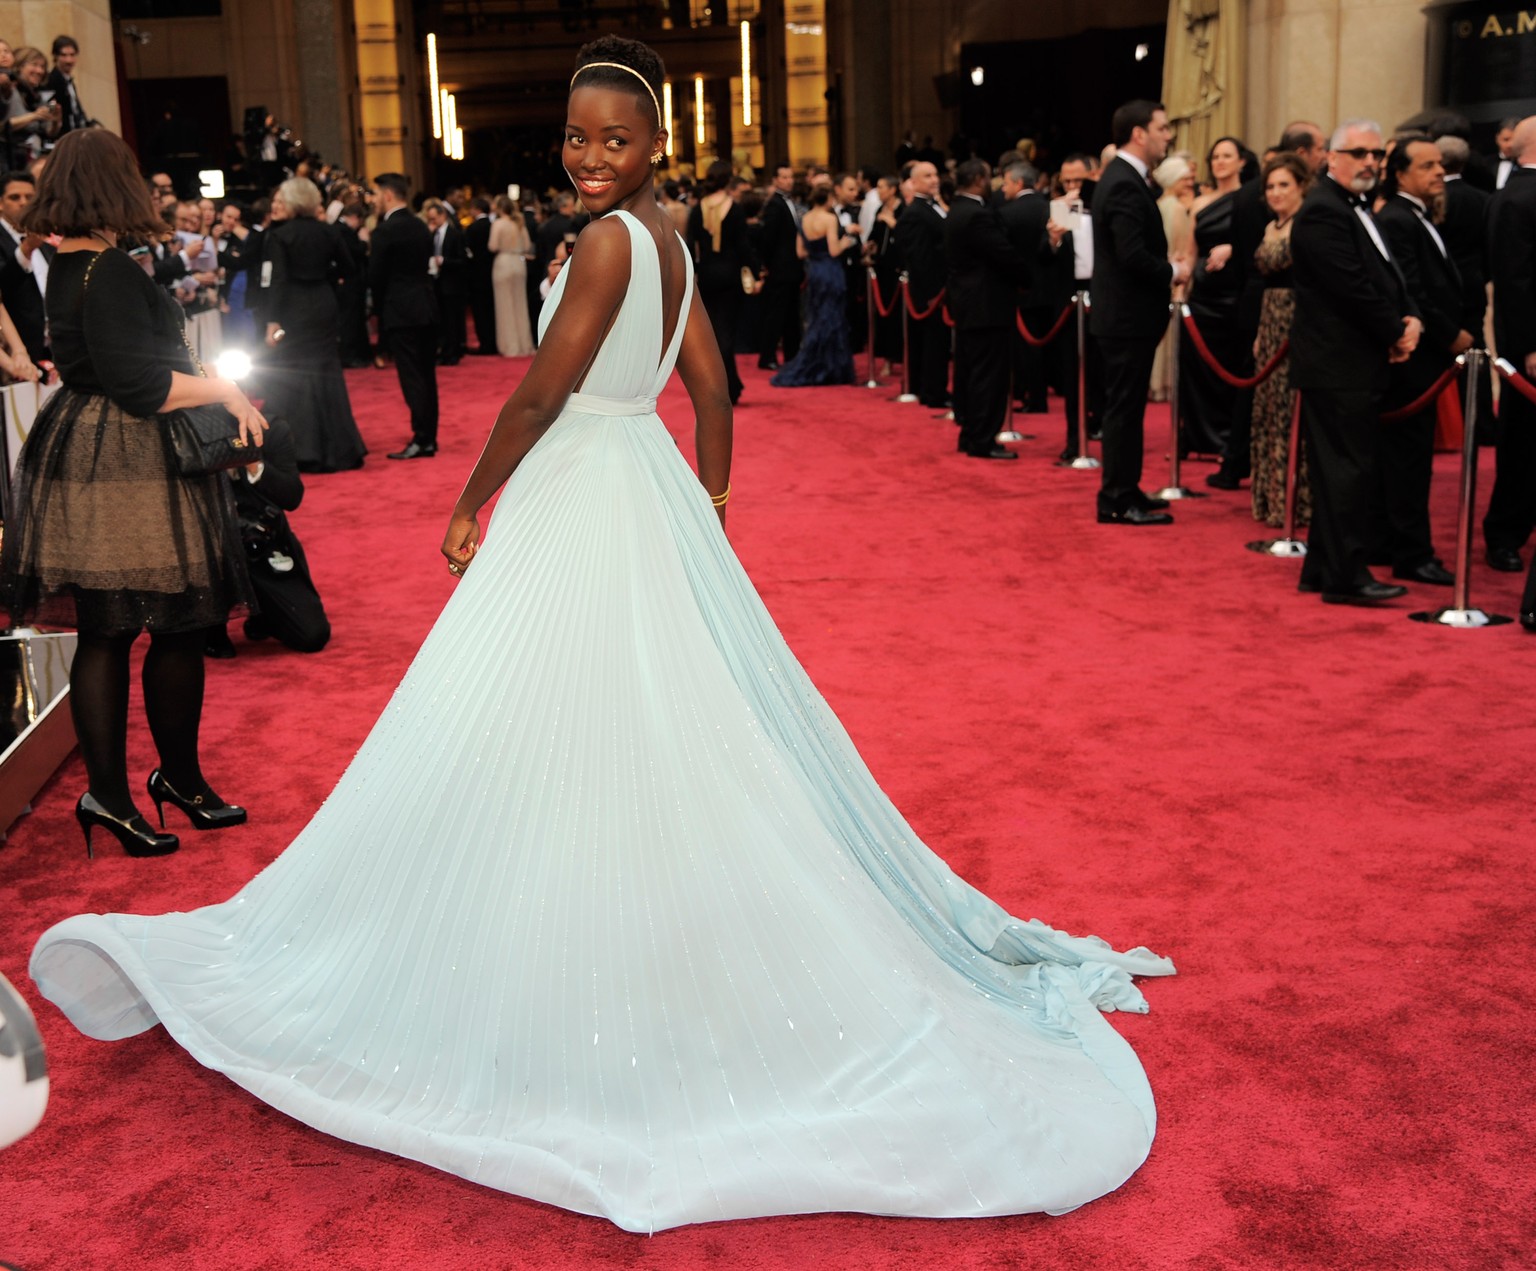 Lupita Nyong&#039;o arrives at the Oscars on Sunday, March 2, 2014, at the Dolby Theatre in Los Angeles. (Photo by Chris Pizzello/Invision/AP)